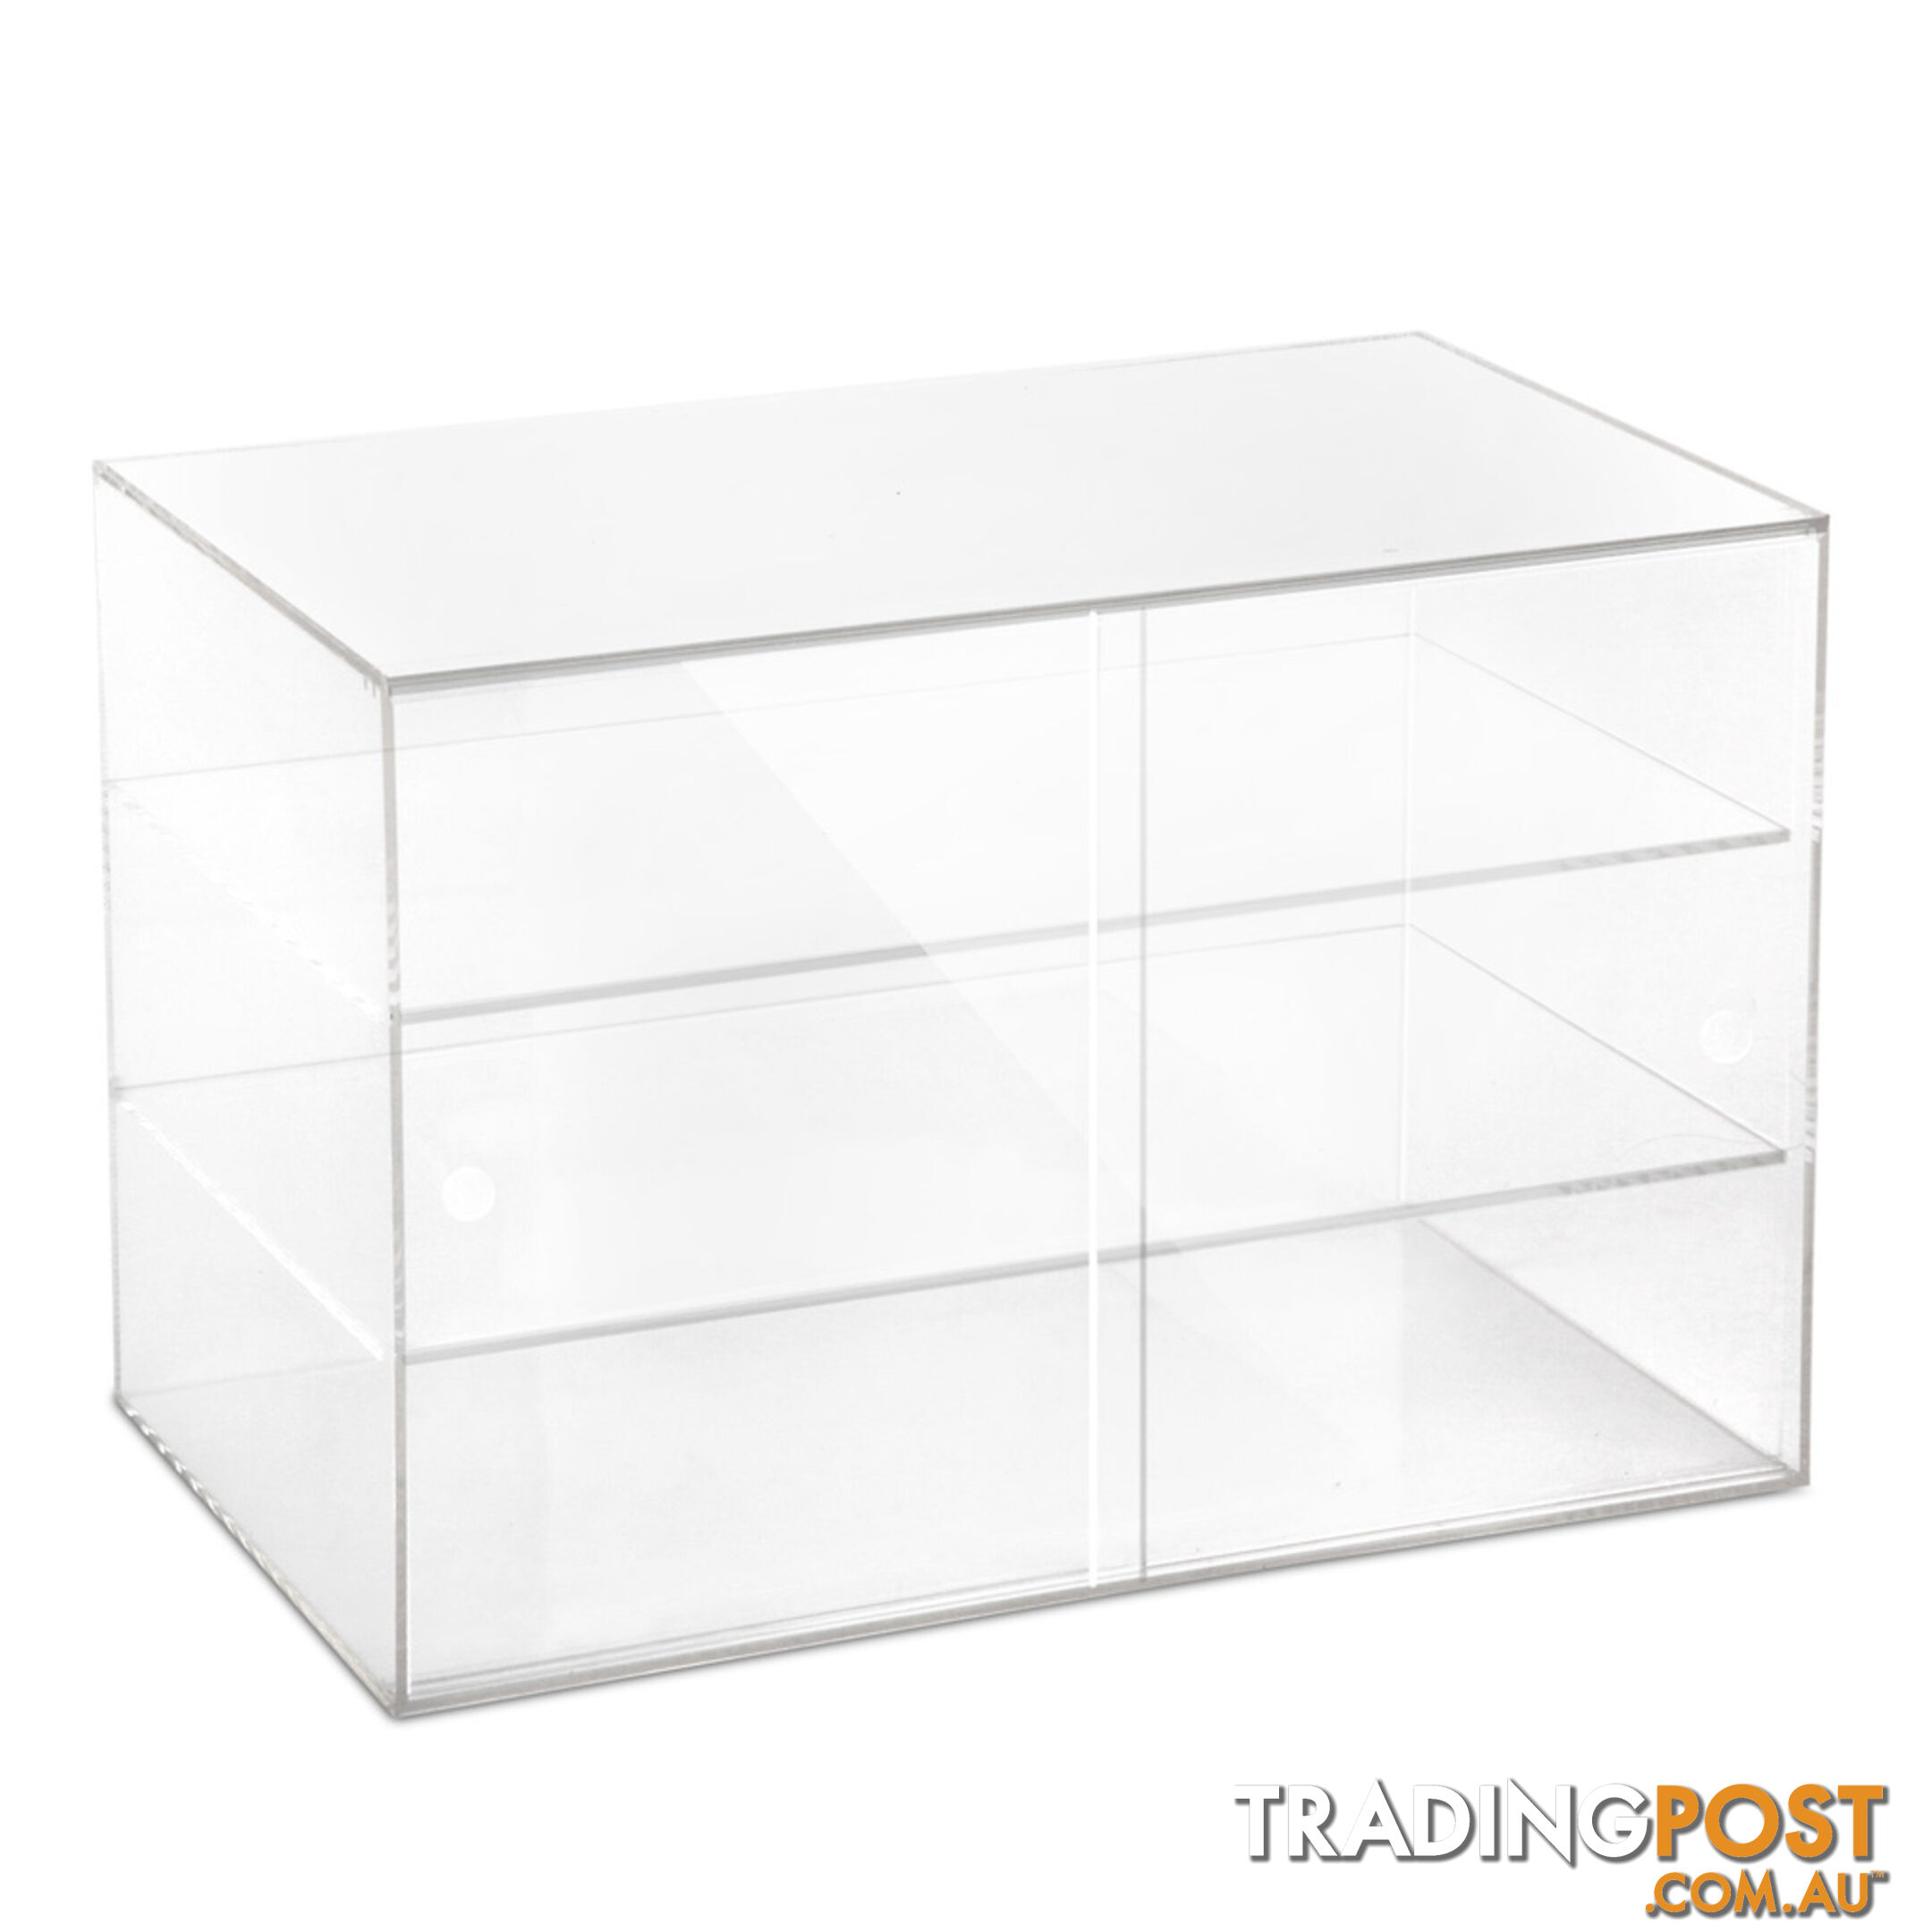 3 Tier Clear Acrylic Display Cabinet with Sliding Door